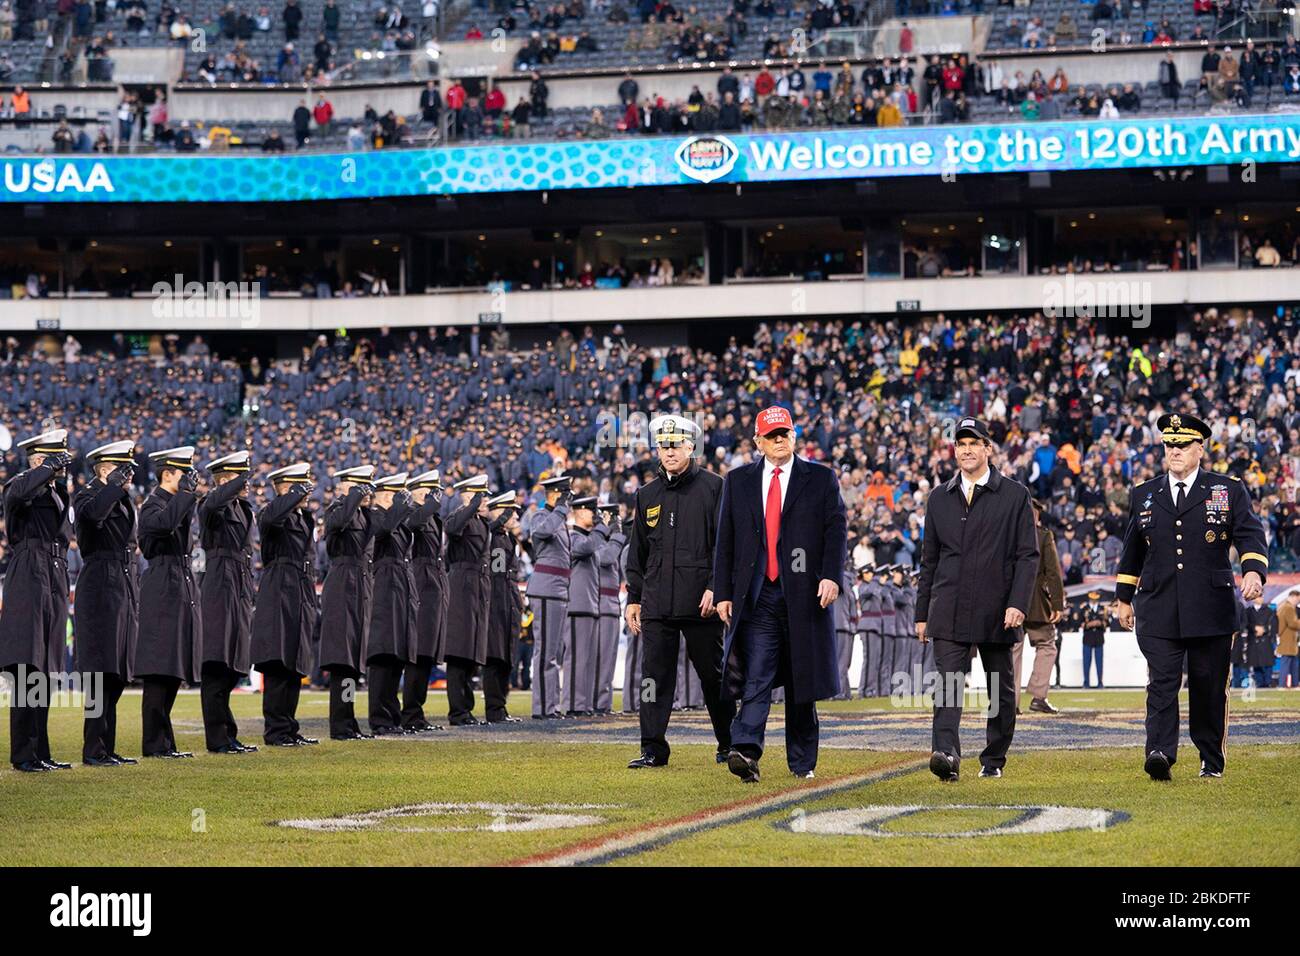 President Donald J. Trump is joined by Secretary of Defense Mark Esper and Joint Chiefs of Staff Chairman Gen. Mark Milley, right, as walks across the field during the 120th Army-Navy football game at Lincoln Financial Field in Philadelphia, Pa. President Trump at the Army-Navy Football Game Stock Photo